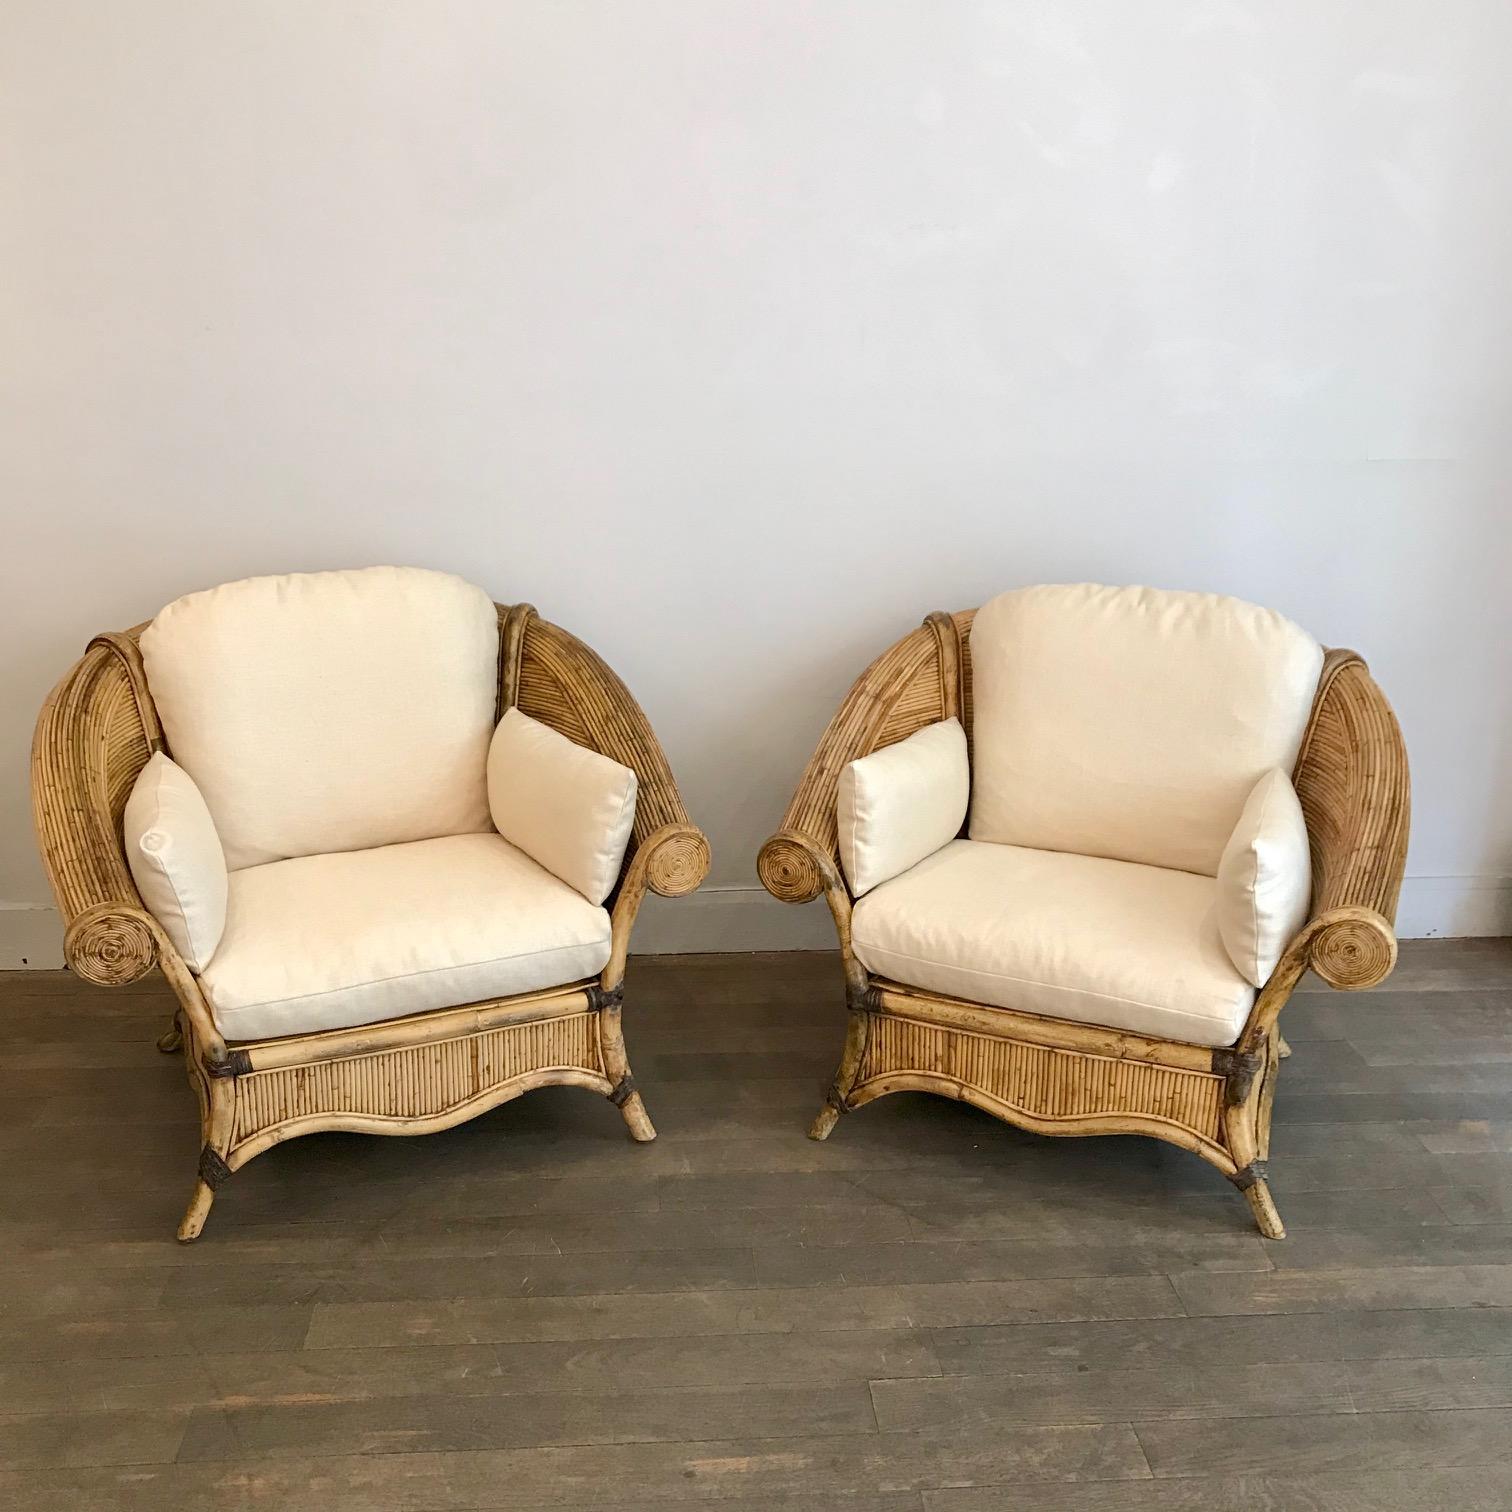 Pair of rattan lounge chairs
Rattan held by leather straps
France, 1960s

Newly re upholstered in beige cotton and linen fabric

Measures: Height 30.7 in. (78 cm)
Width 38.6 in. (98 cm)
Depth 30.3 in. (77 cm)
Height seat 15.3 in. (39 cm).
 